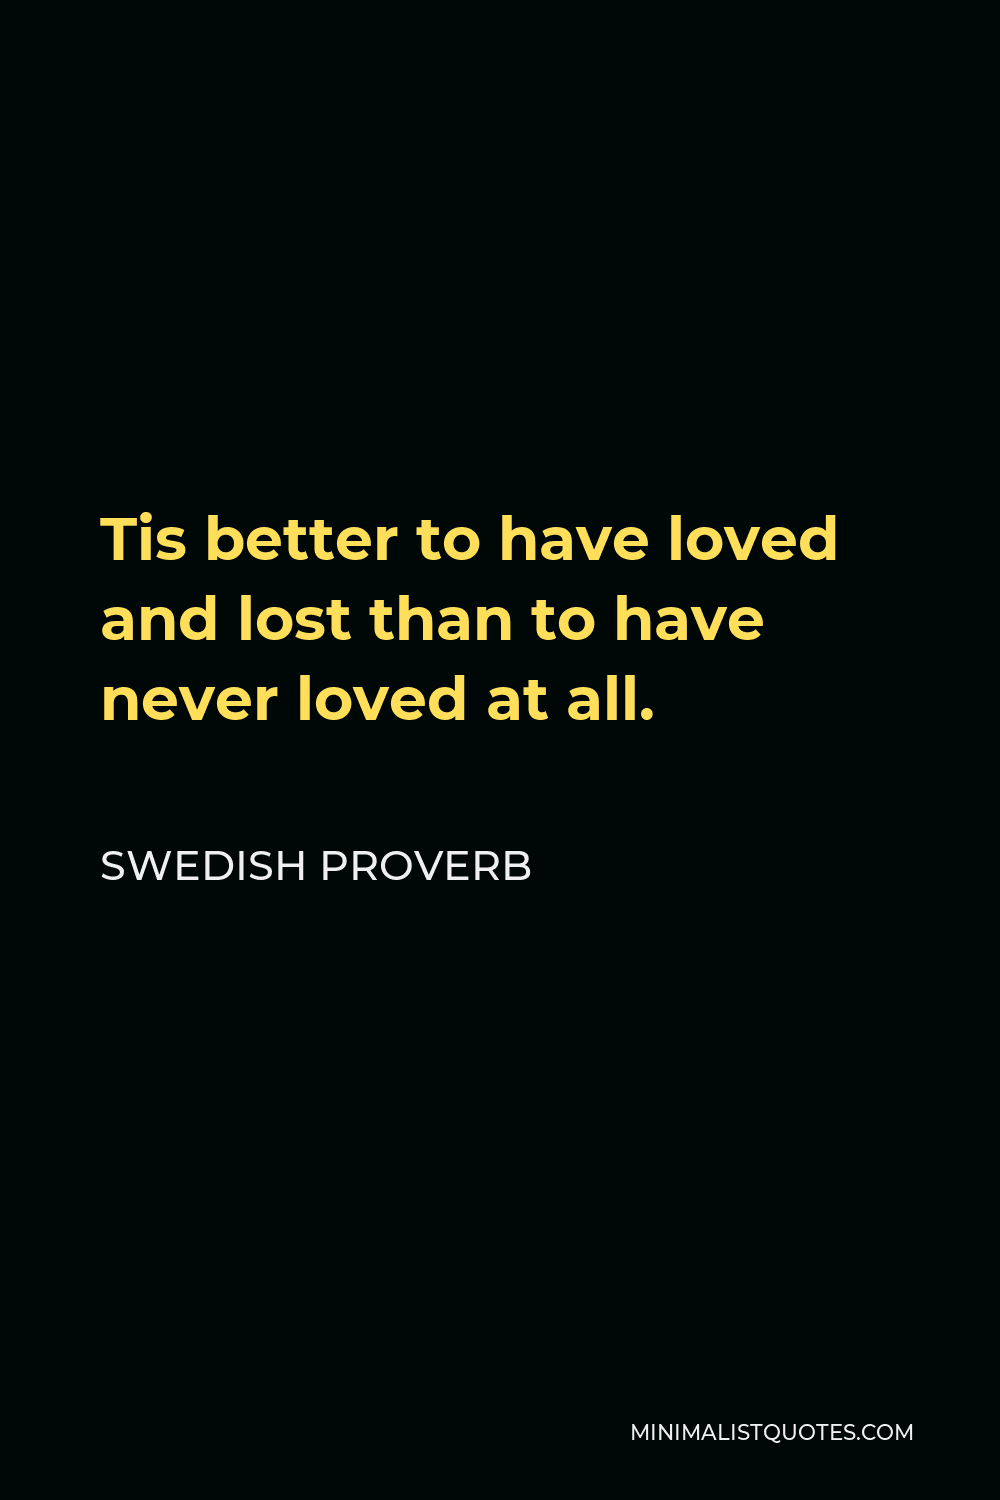 Swedish Proverb Quote - Tis better to have loved and lost than to have never loved at all.